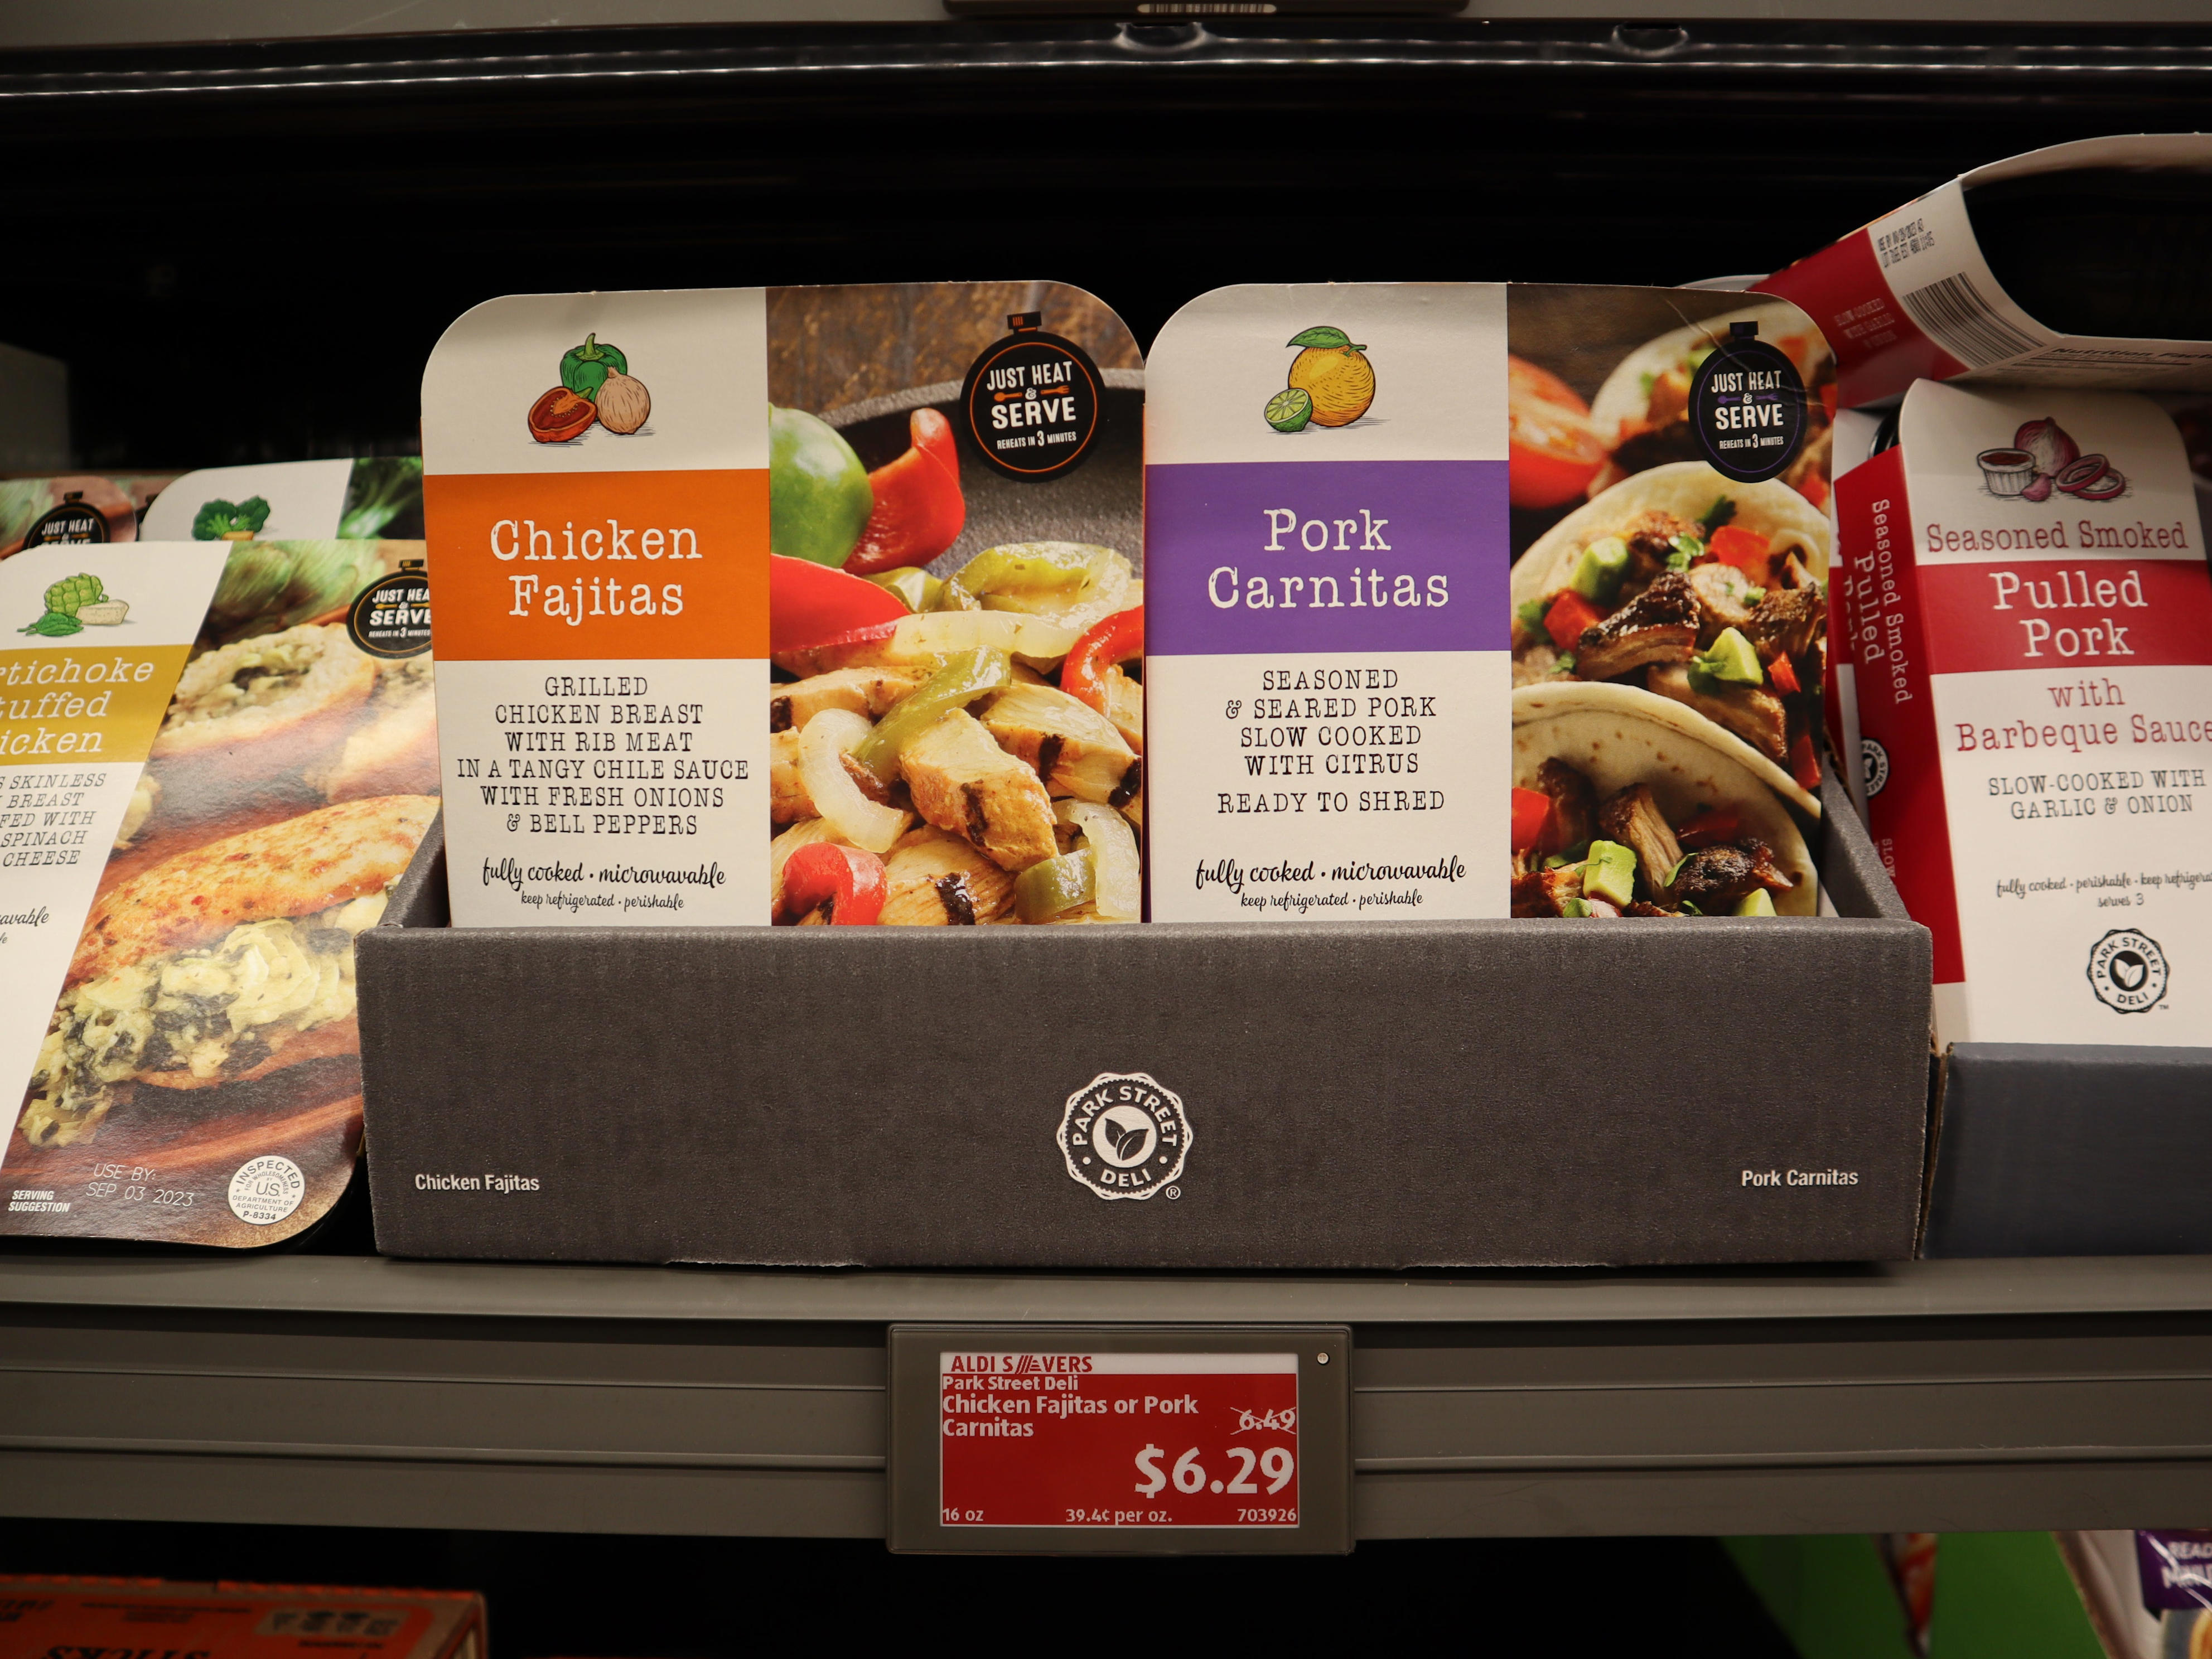 <p>The Park Street Deli microwaveable meals are fully cooked and need to be refrigerated, so we'll grab these when we want <a href="https://www.insider.com/review-aldi-best-frozen-meals-worth-buying-from-chef">something hearty</a> but don't feel like leaving our hotel to go out to dinner.</p><p>There are a variety of microwavable meals to choose from, including pork carnitas, chicken fajitas, and pulled pork. My favorite flavor is the artichoke-stuffed chicken, which can last two to three meals when paired with rice.</p><p>Depending on the type you get, the Park Street Deli meals cost $6.50 to $7.50 each.</p>